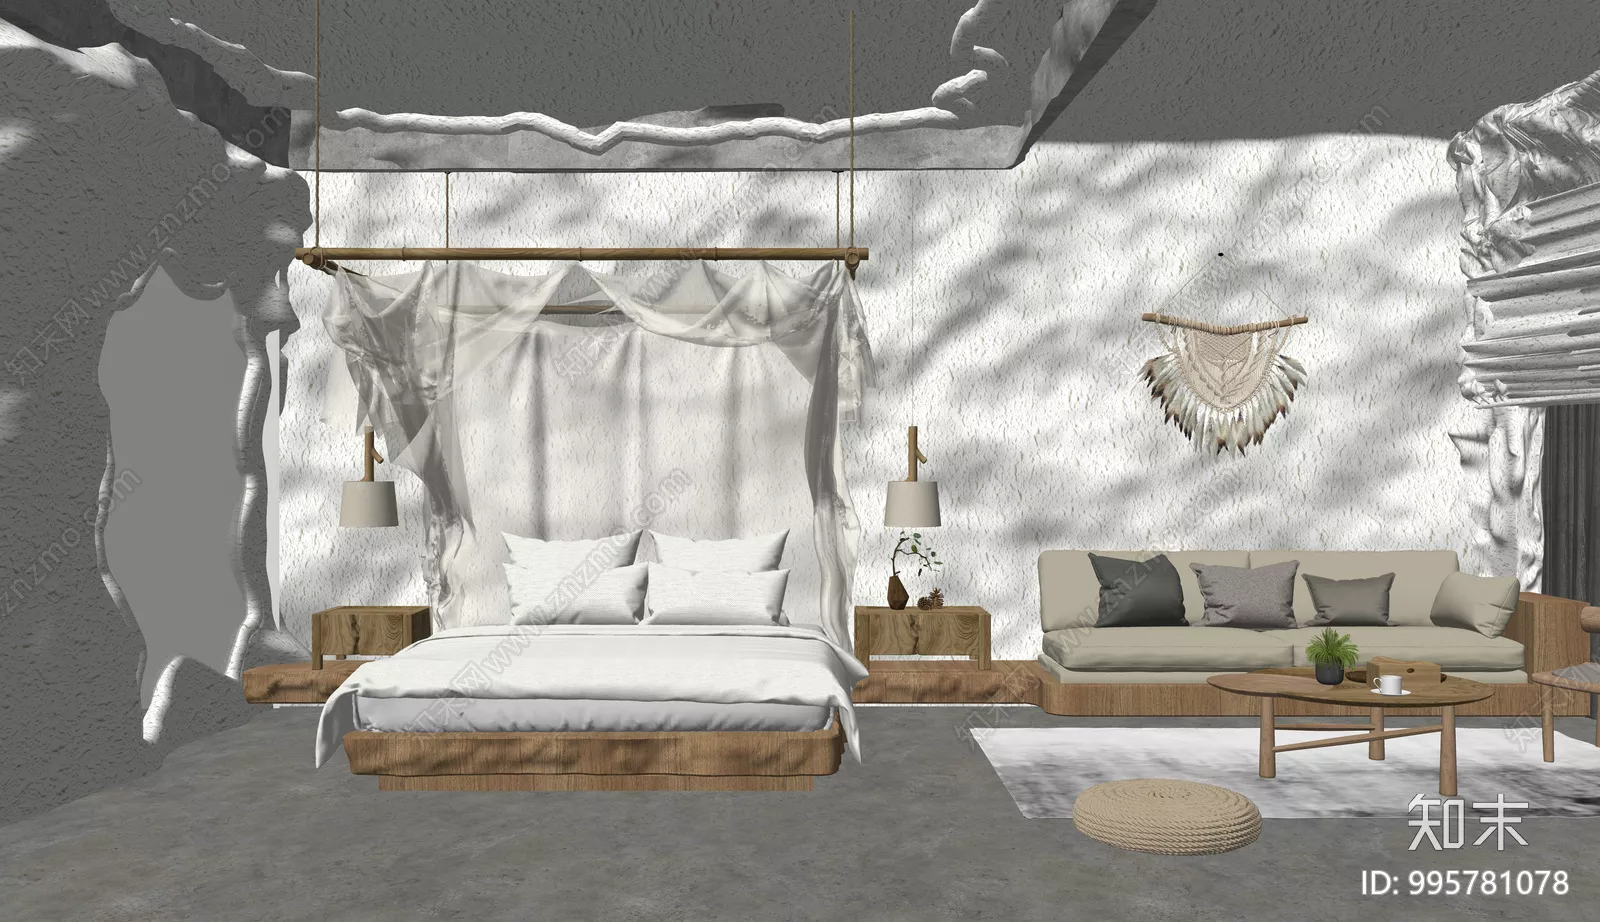 WABI SABI INTERIOR COLLECTION - SKETCHUP 3D SCENE - VRAY OR ENSCAPE - ID17916